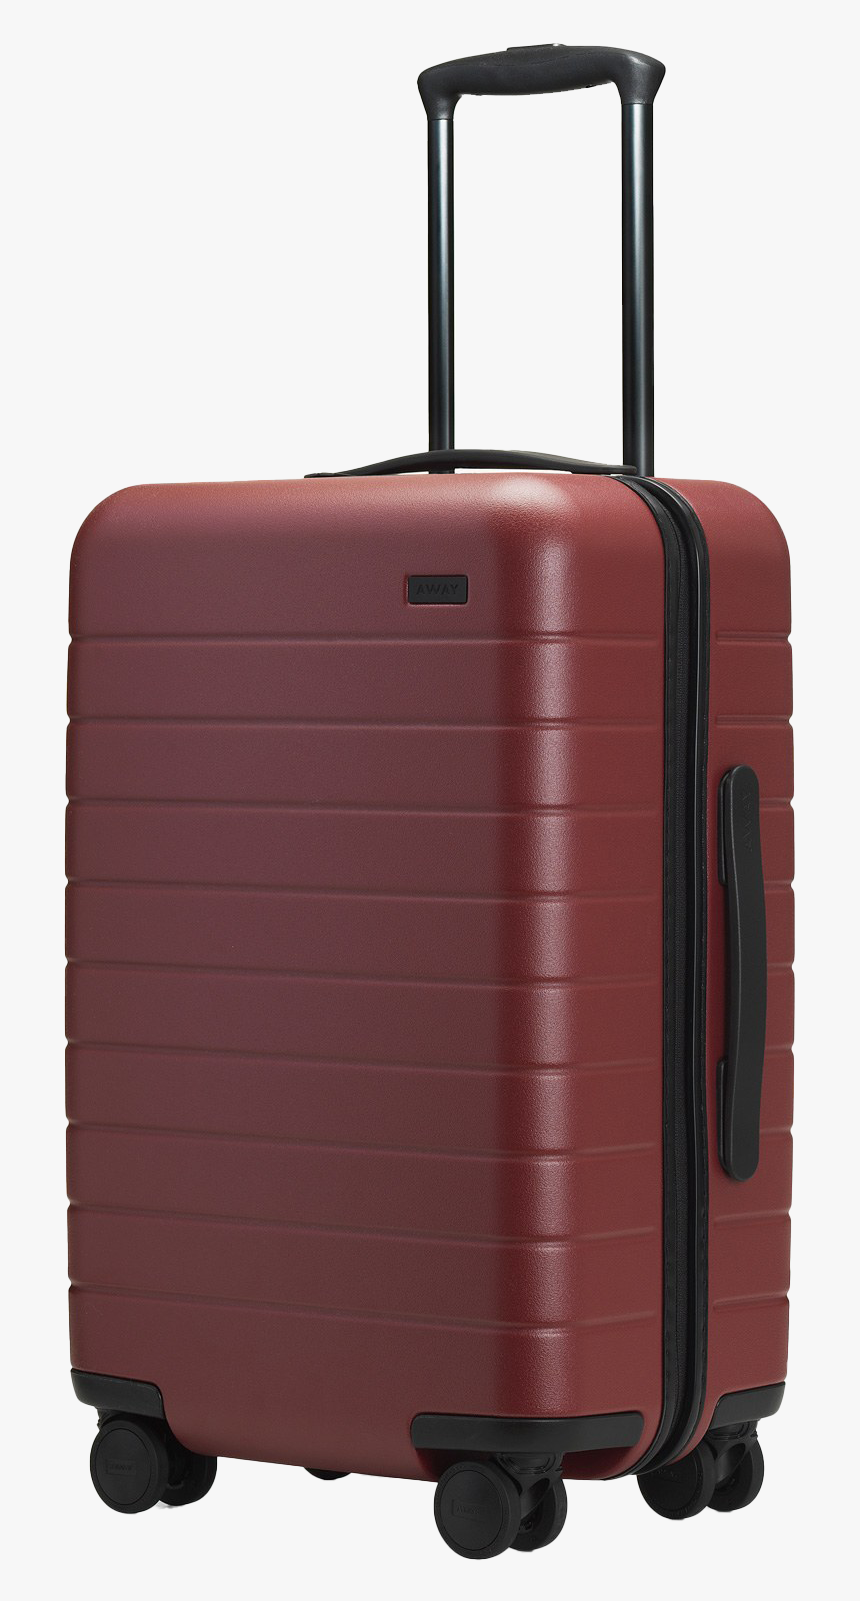 Suitcase Png Picture - Away Suitcase, Transparent Png, Free Download